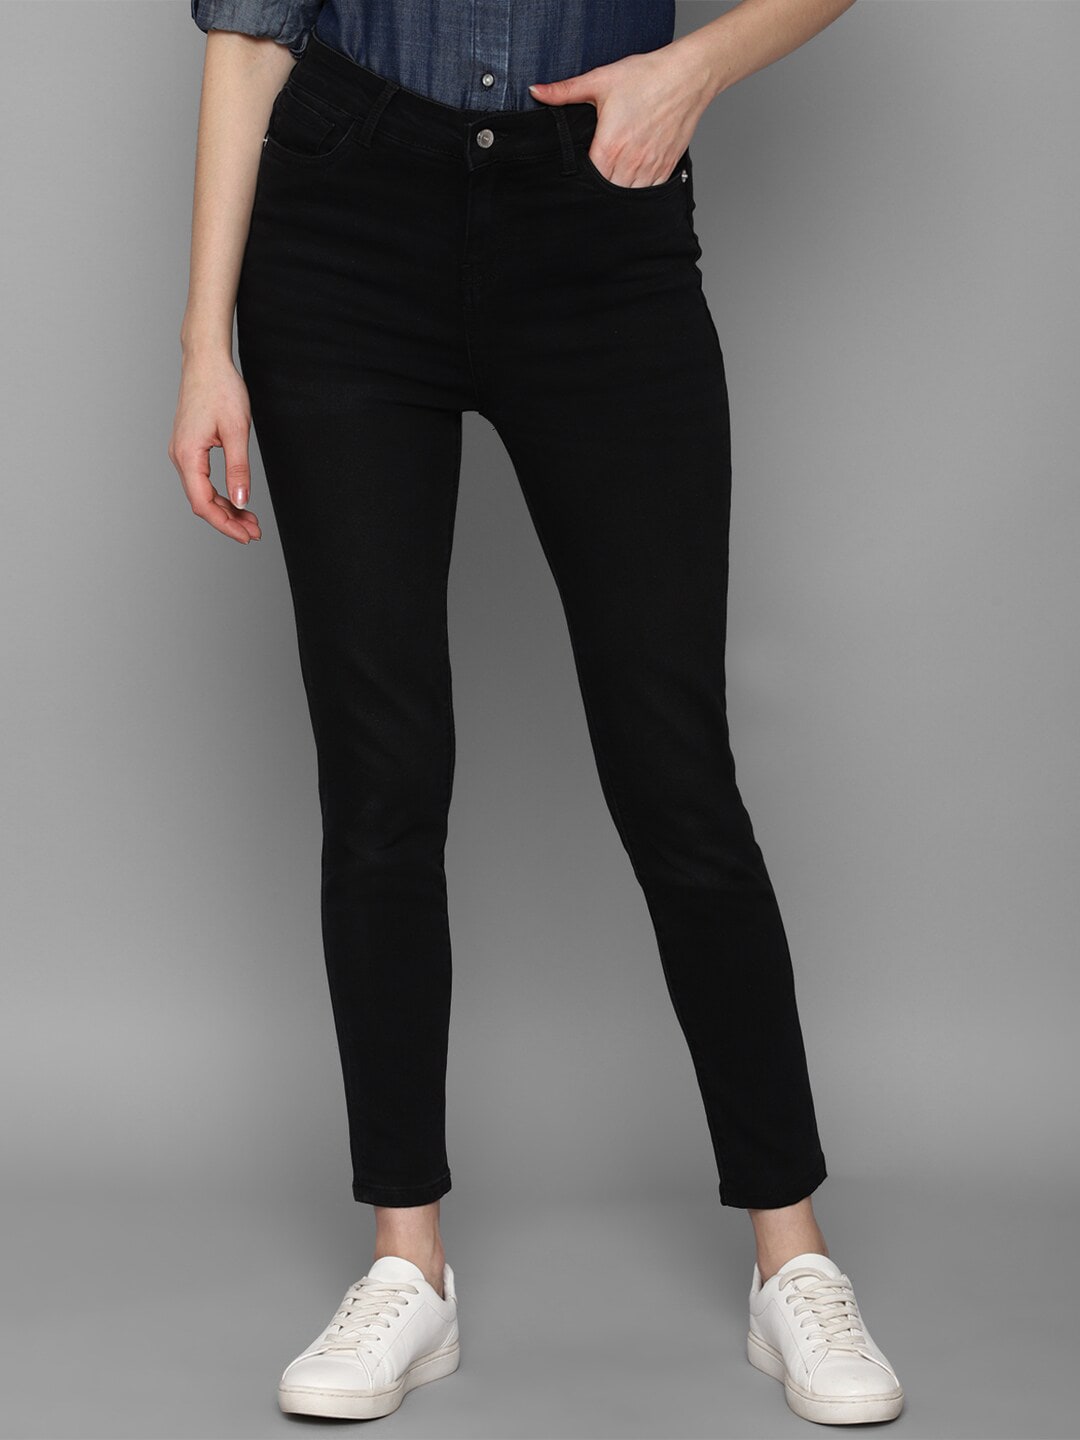 Allen Solly Woman Women Black Skinny Fit Jeans Price in India